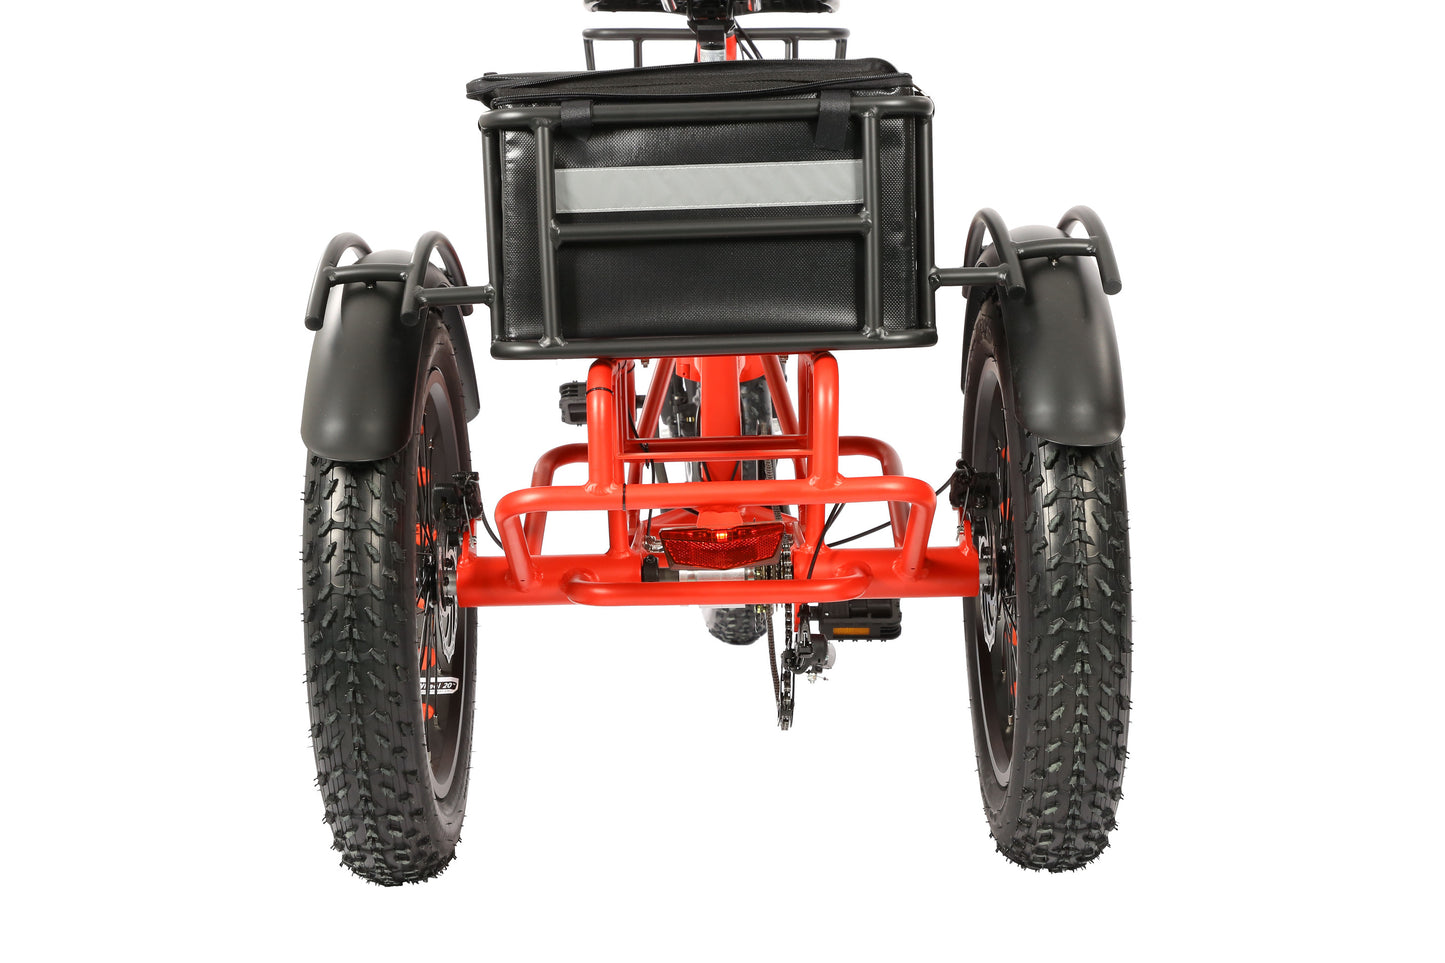 ECORD ROVER Pro Electric Tricycle